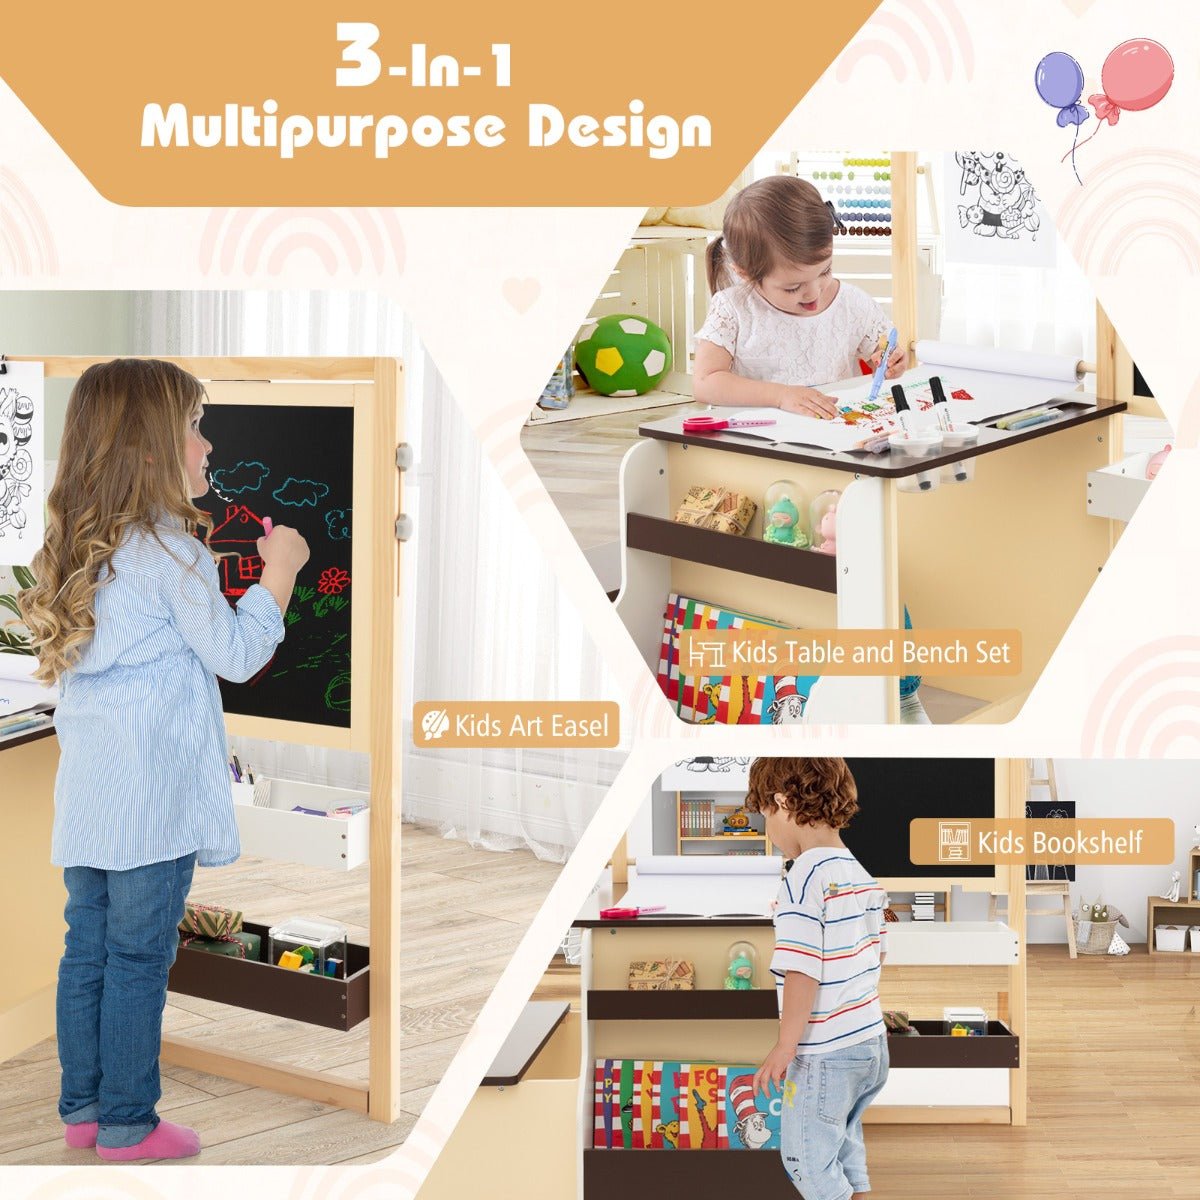 Get Inspired with the Kids Art Table & Bench Set